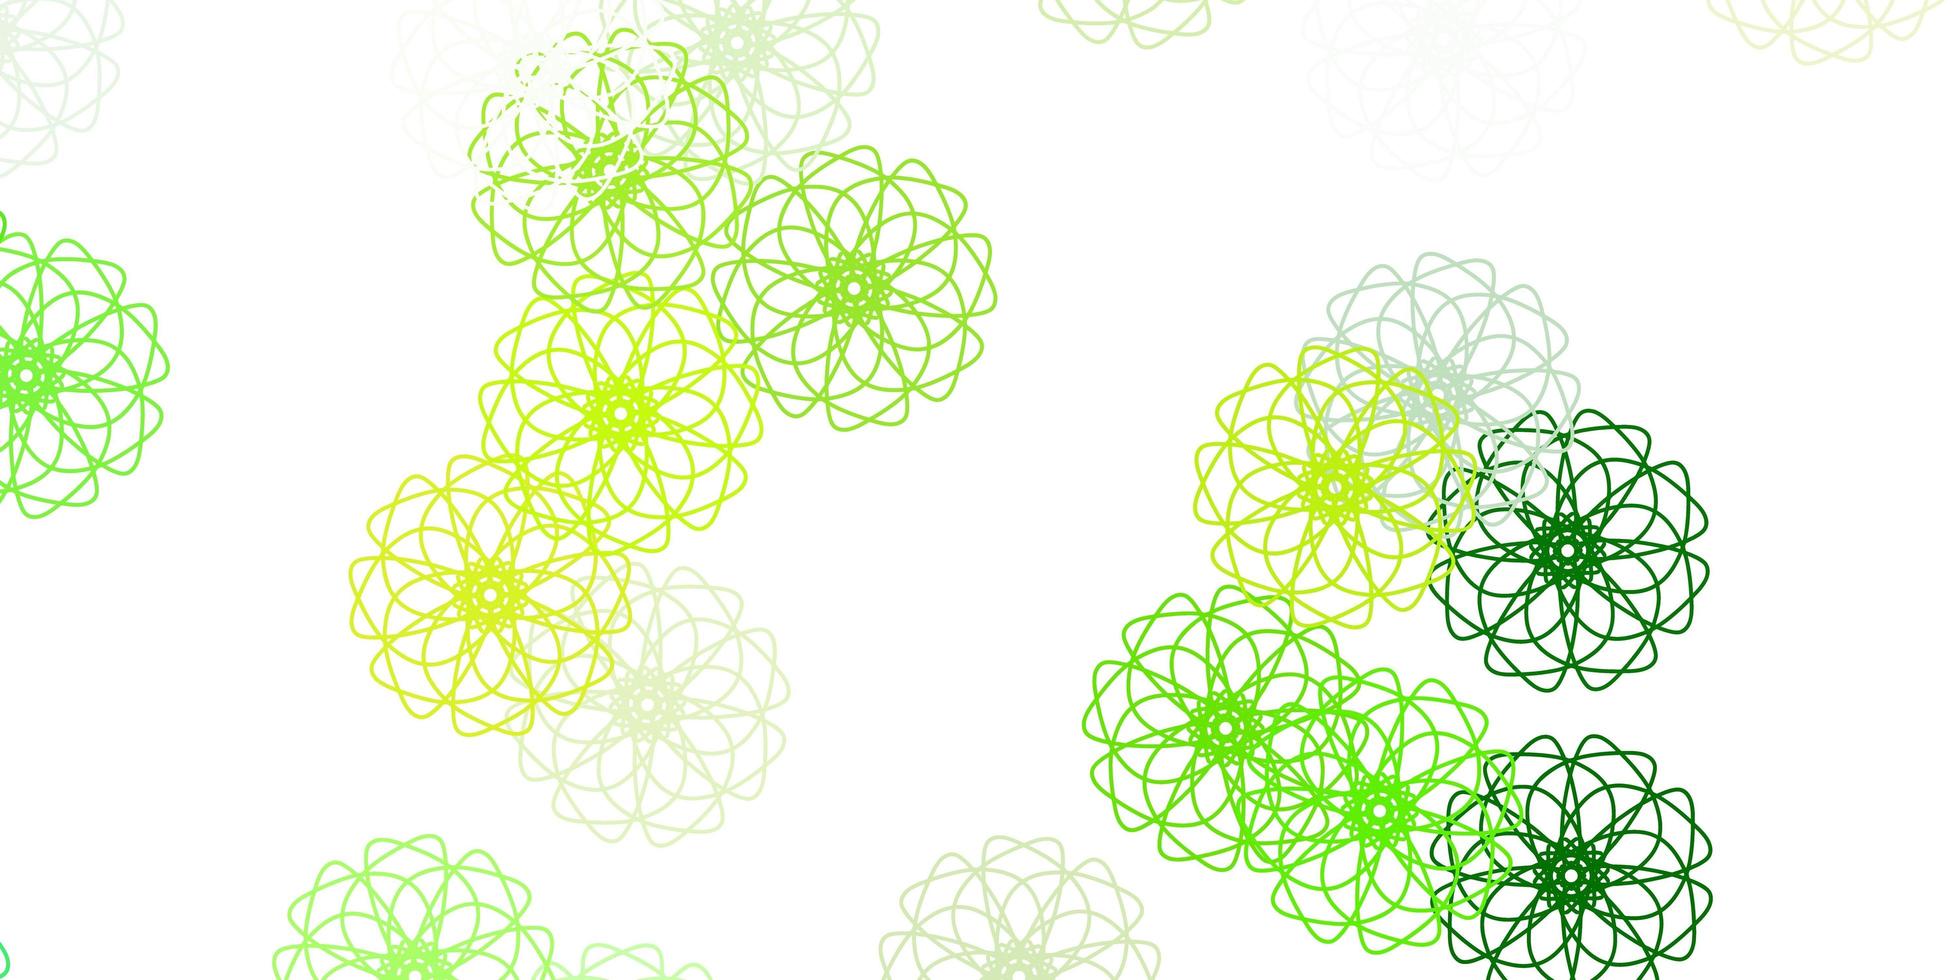 Light green, yellow vector doodle background with flowers.